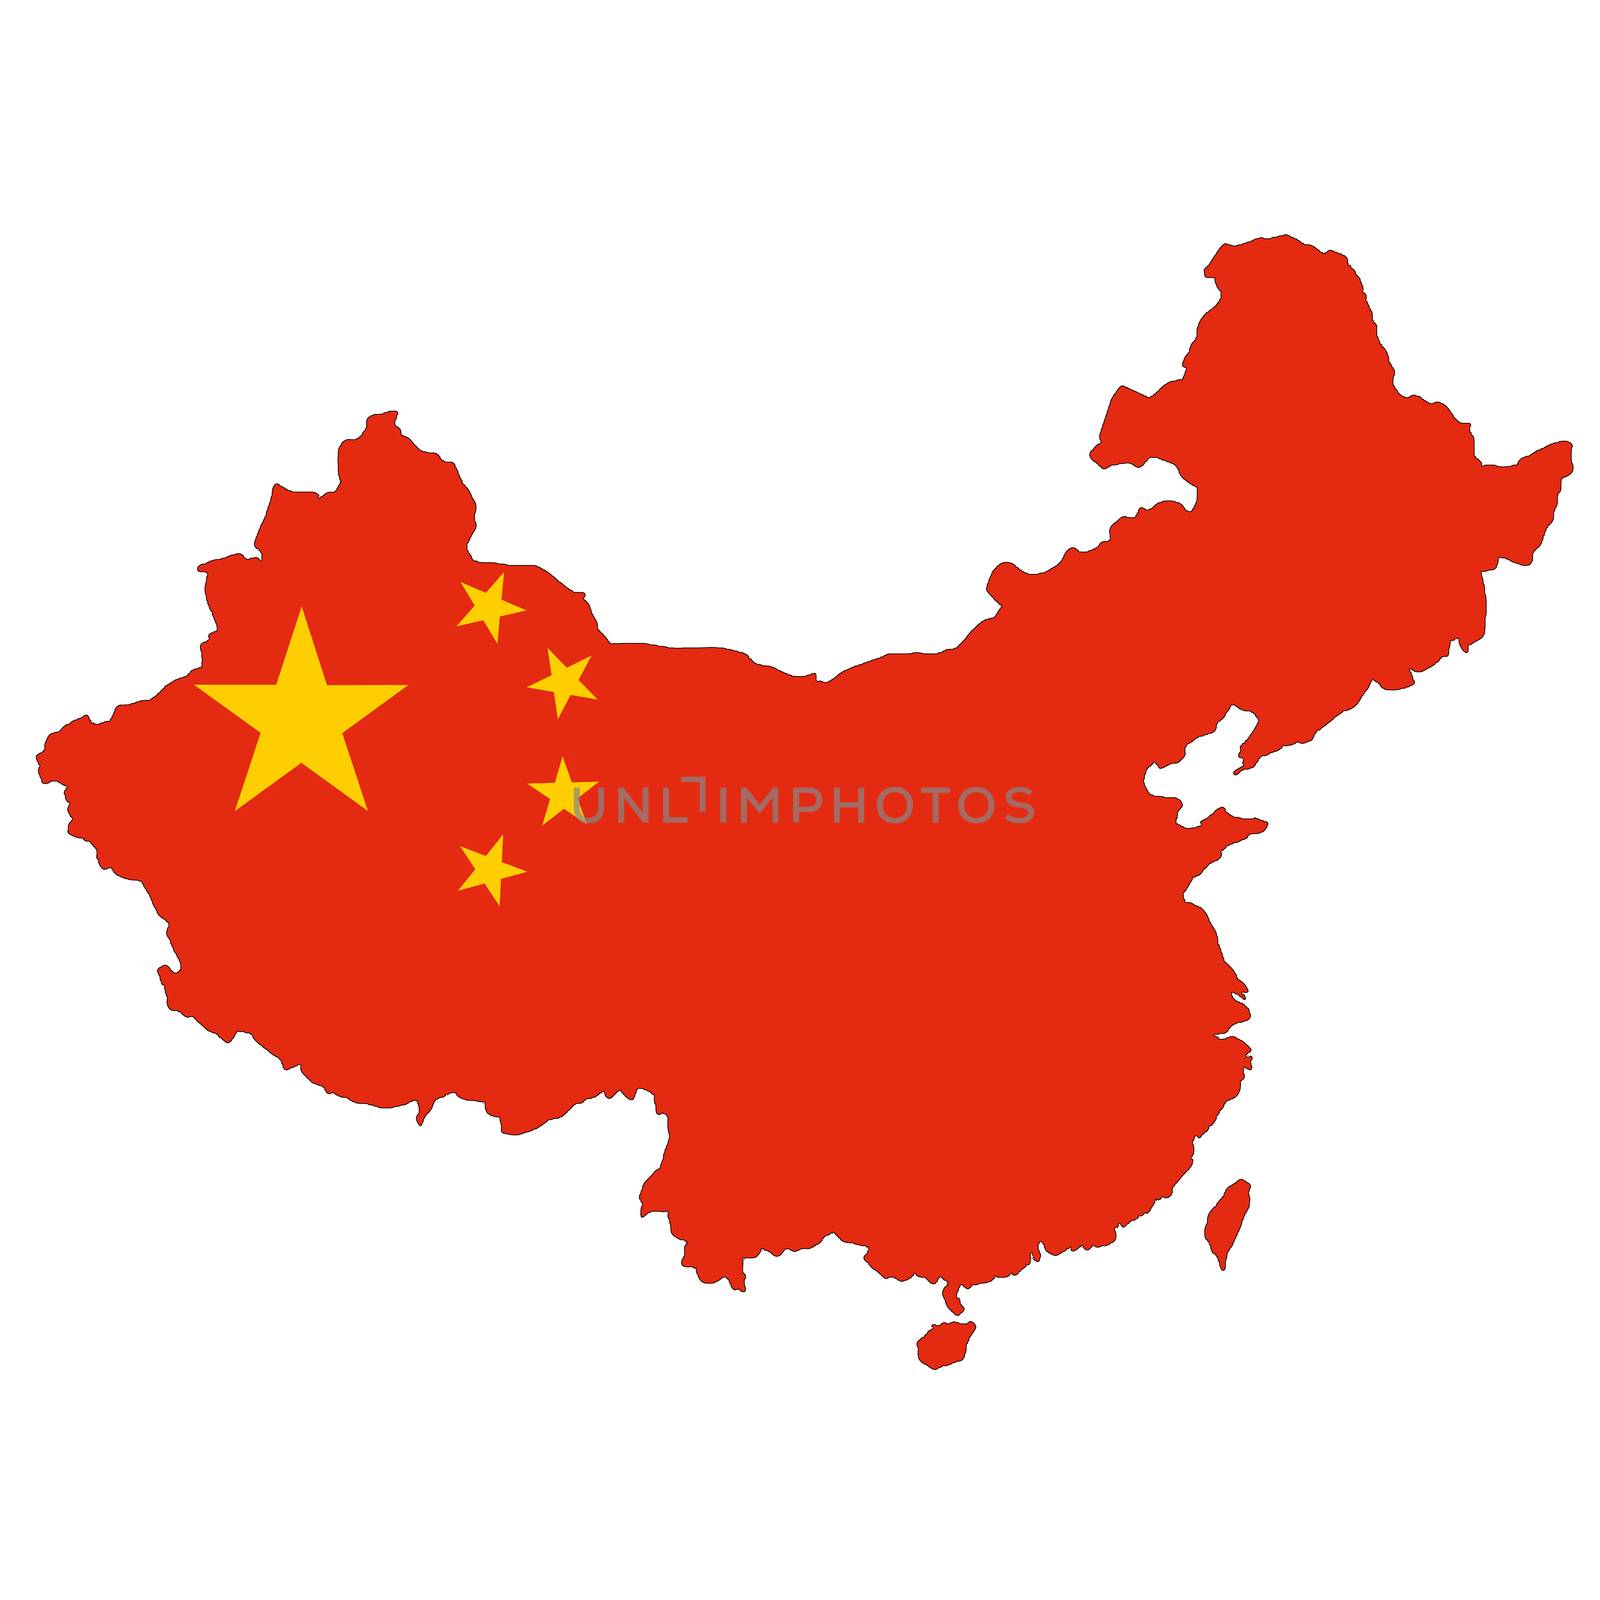 A China map on white background with clipping path